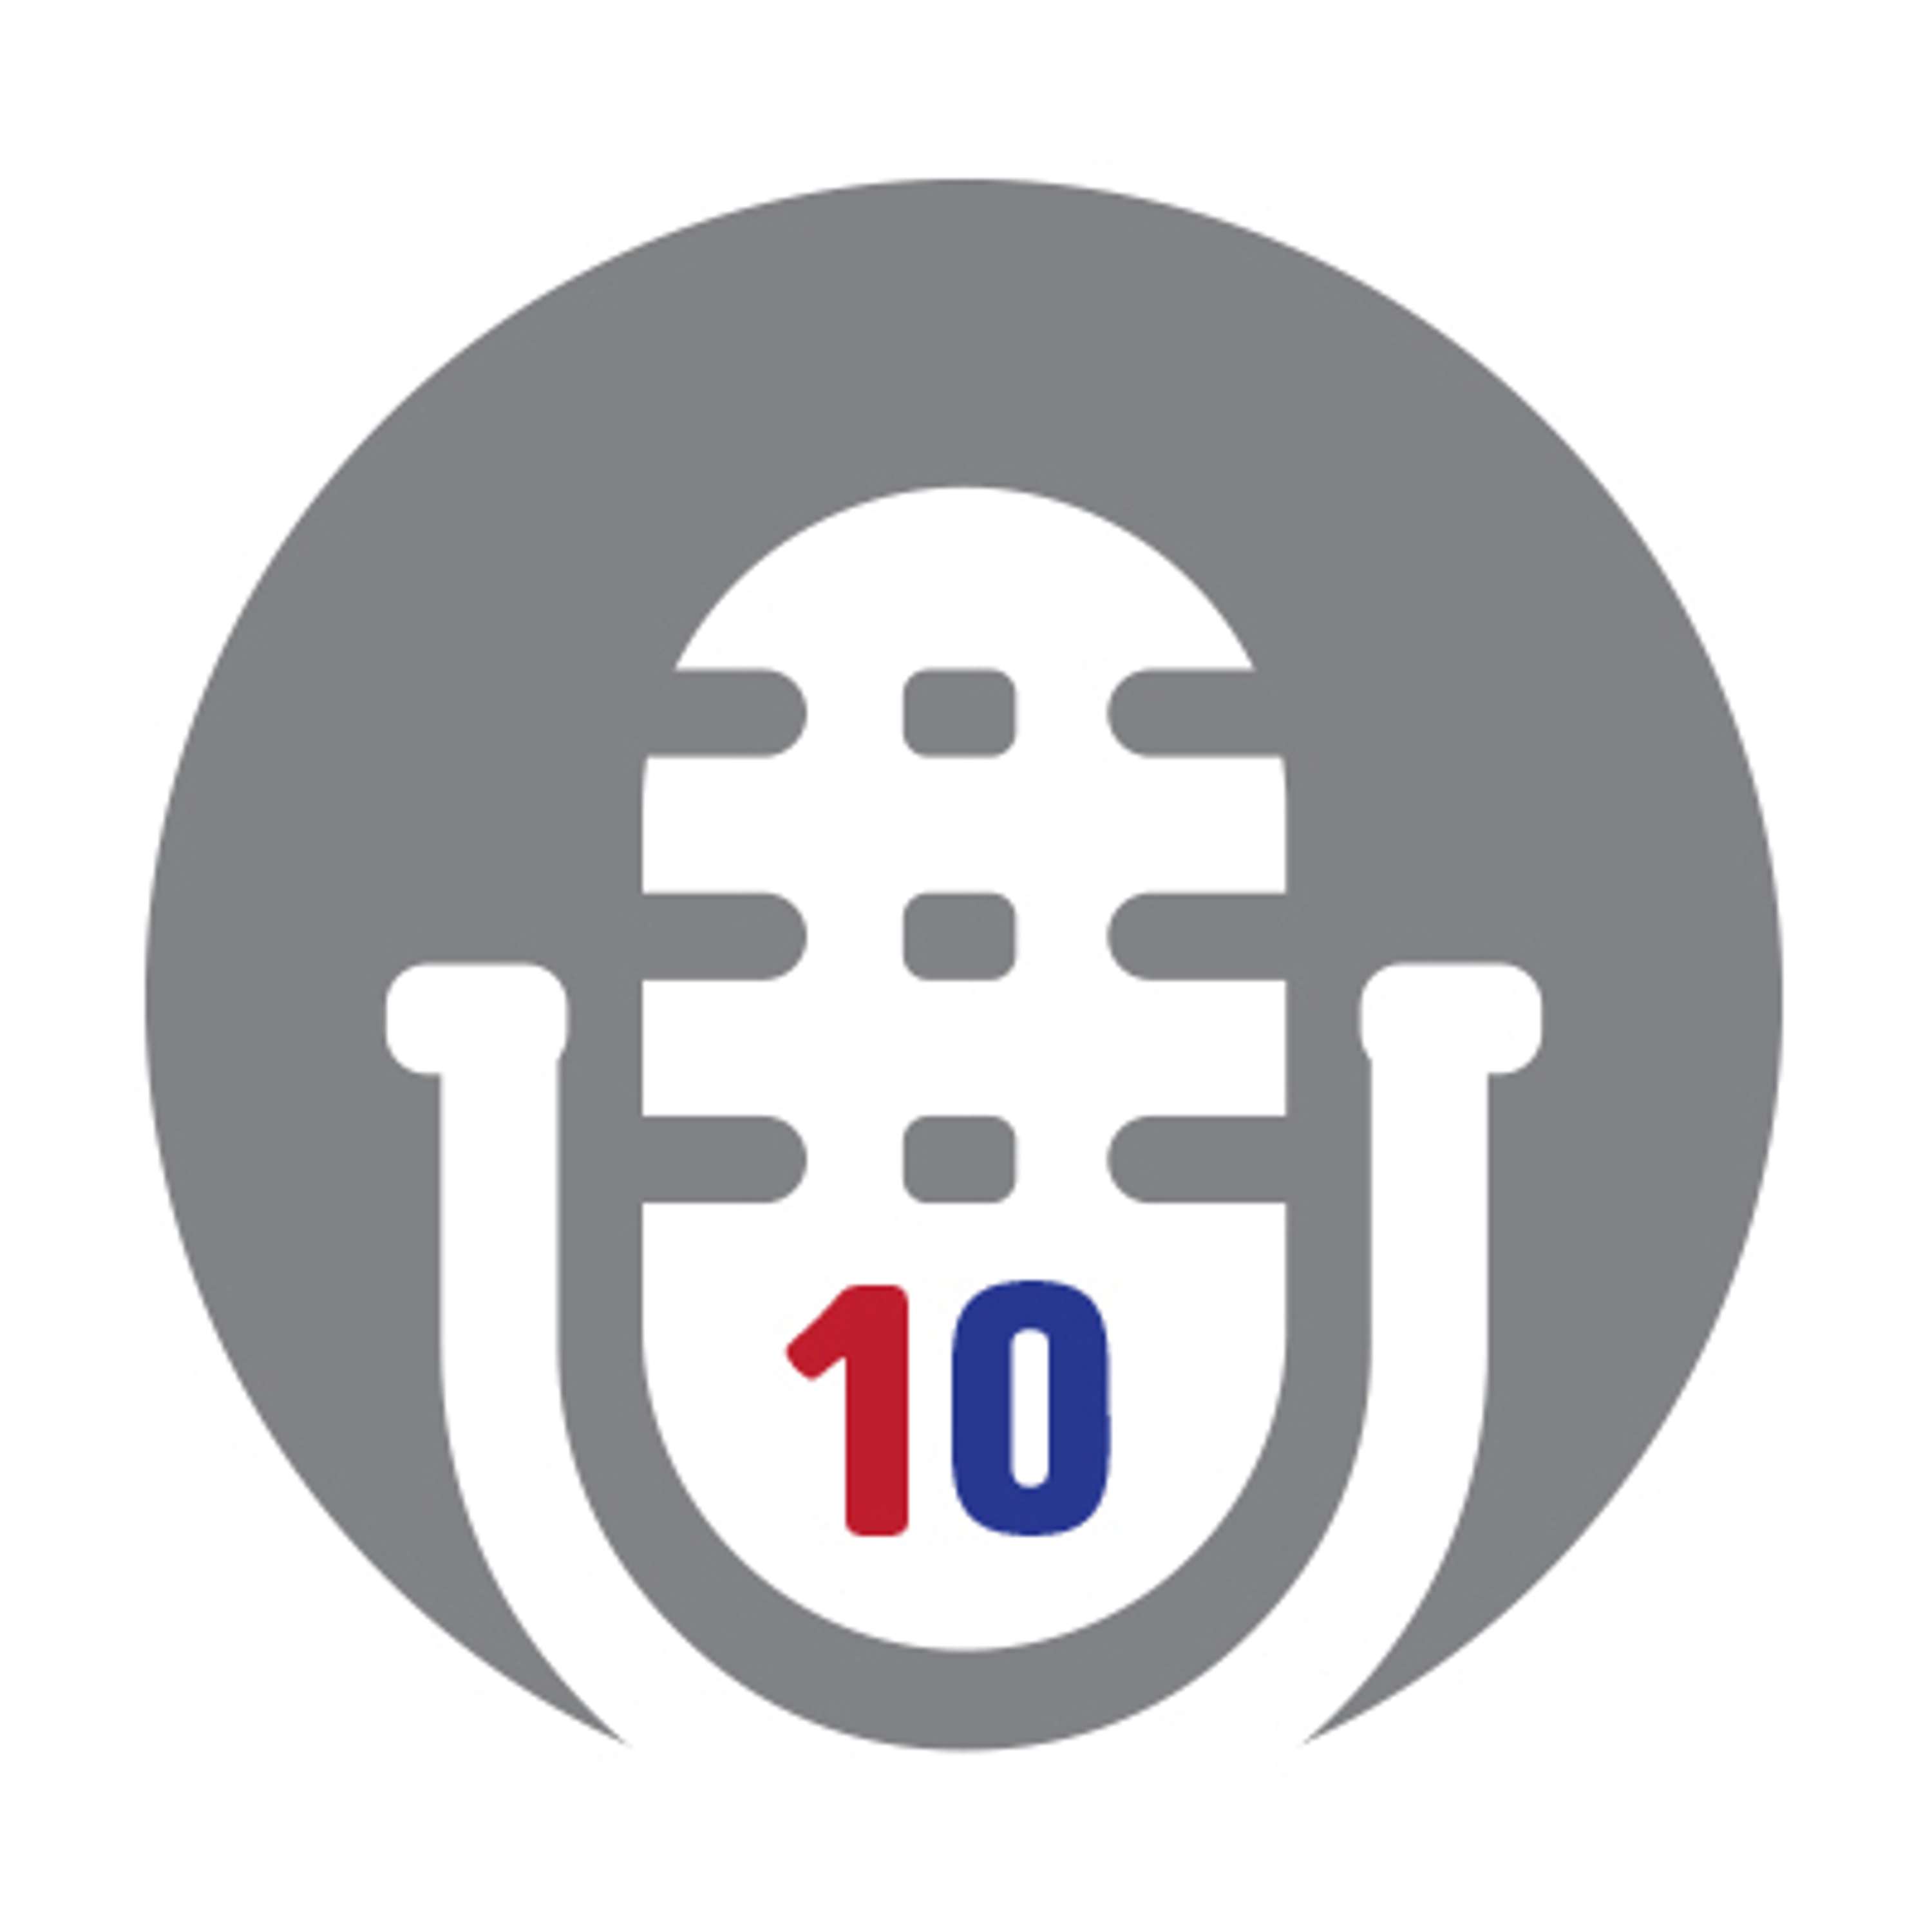 ADTENTION! The American Advertising Federation Tenth District Podcast